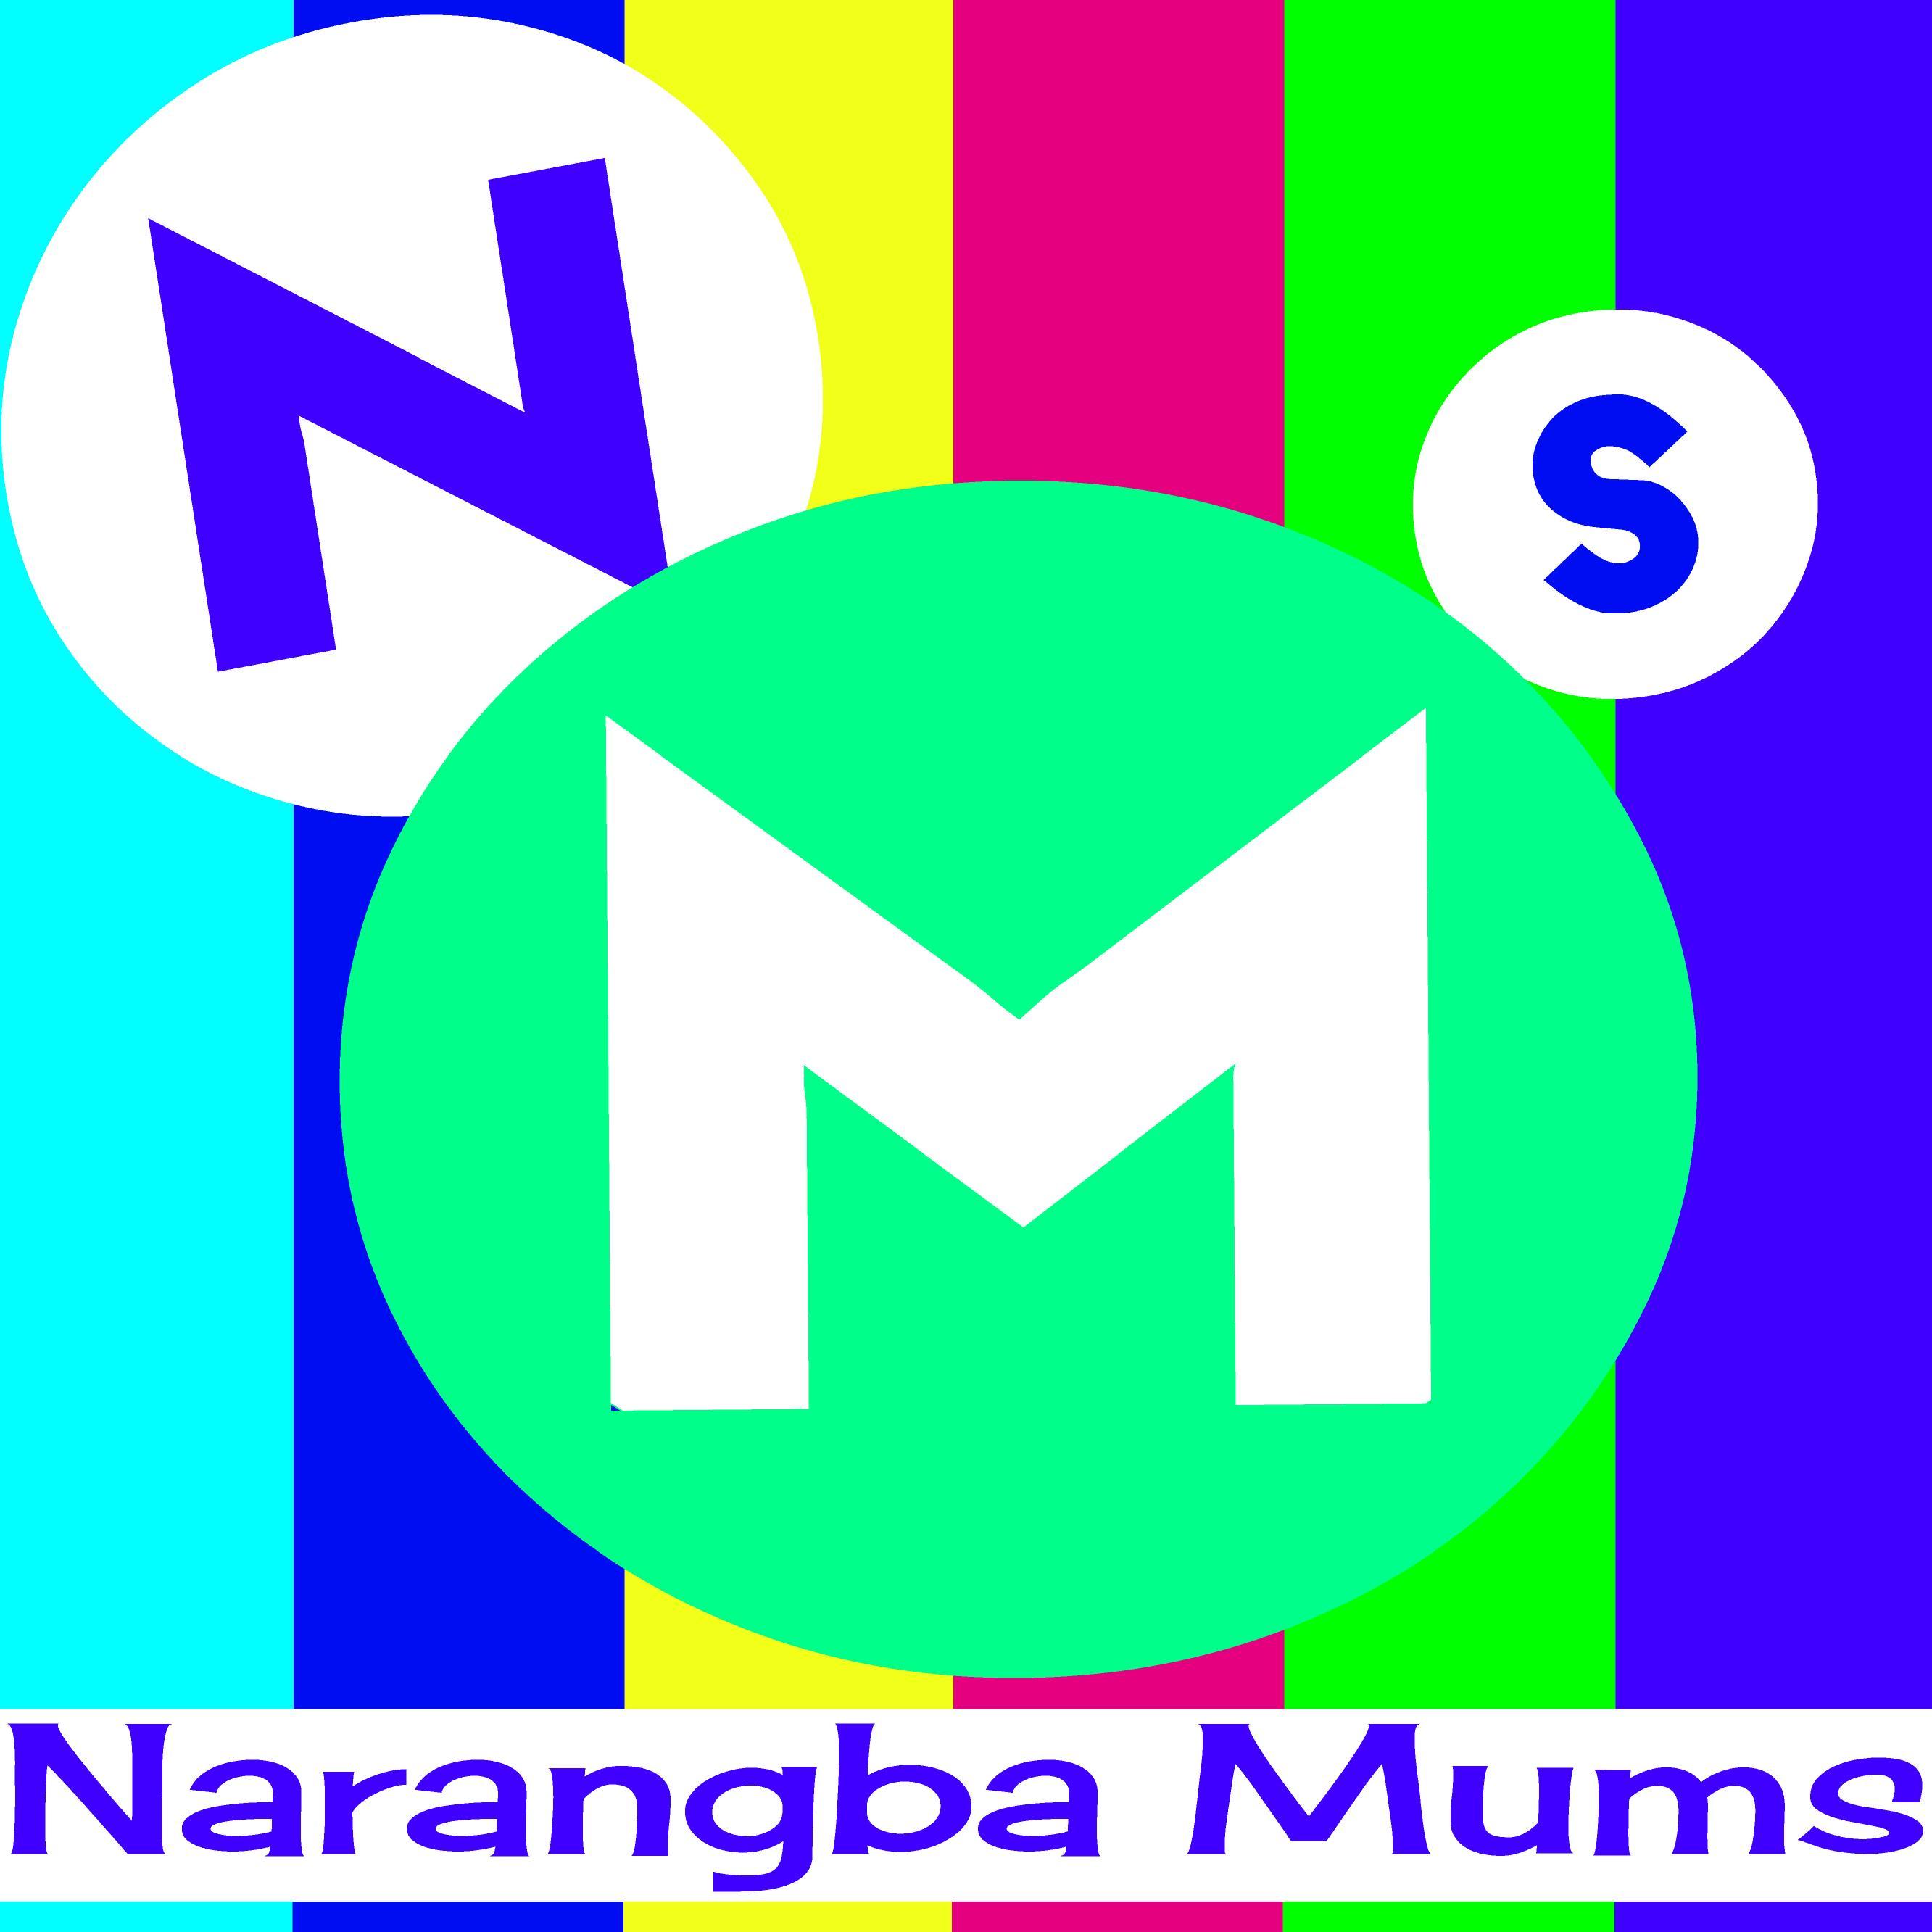 Narangba Mums is a way for mums in and around Narangba to connect and share a sense of community.